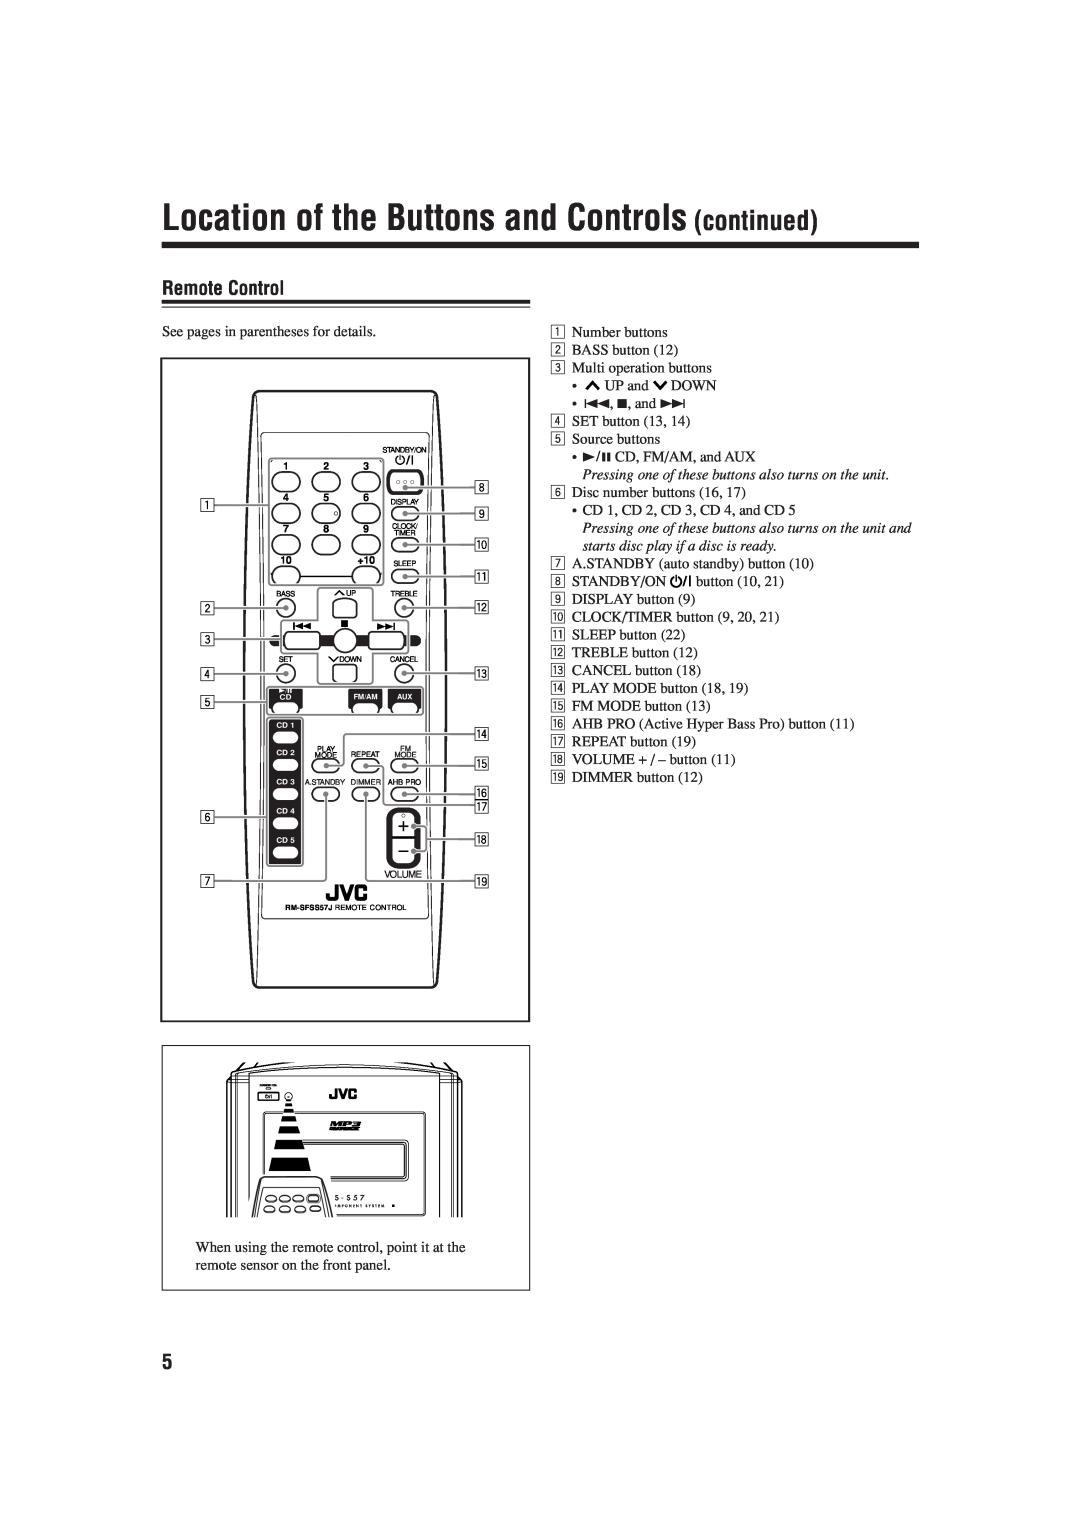 JVC GVT0134-001B, CA-FSS57 manual Location of the Buttons and Controls continued, Remote Control 